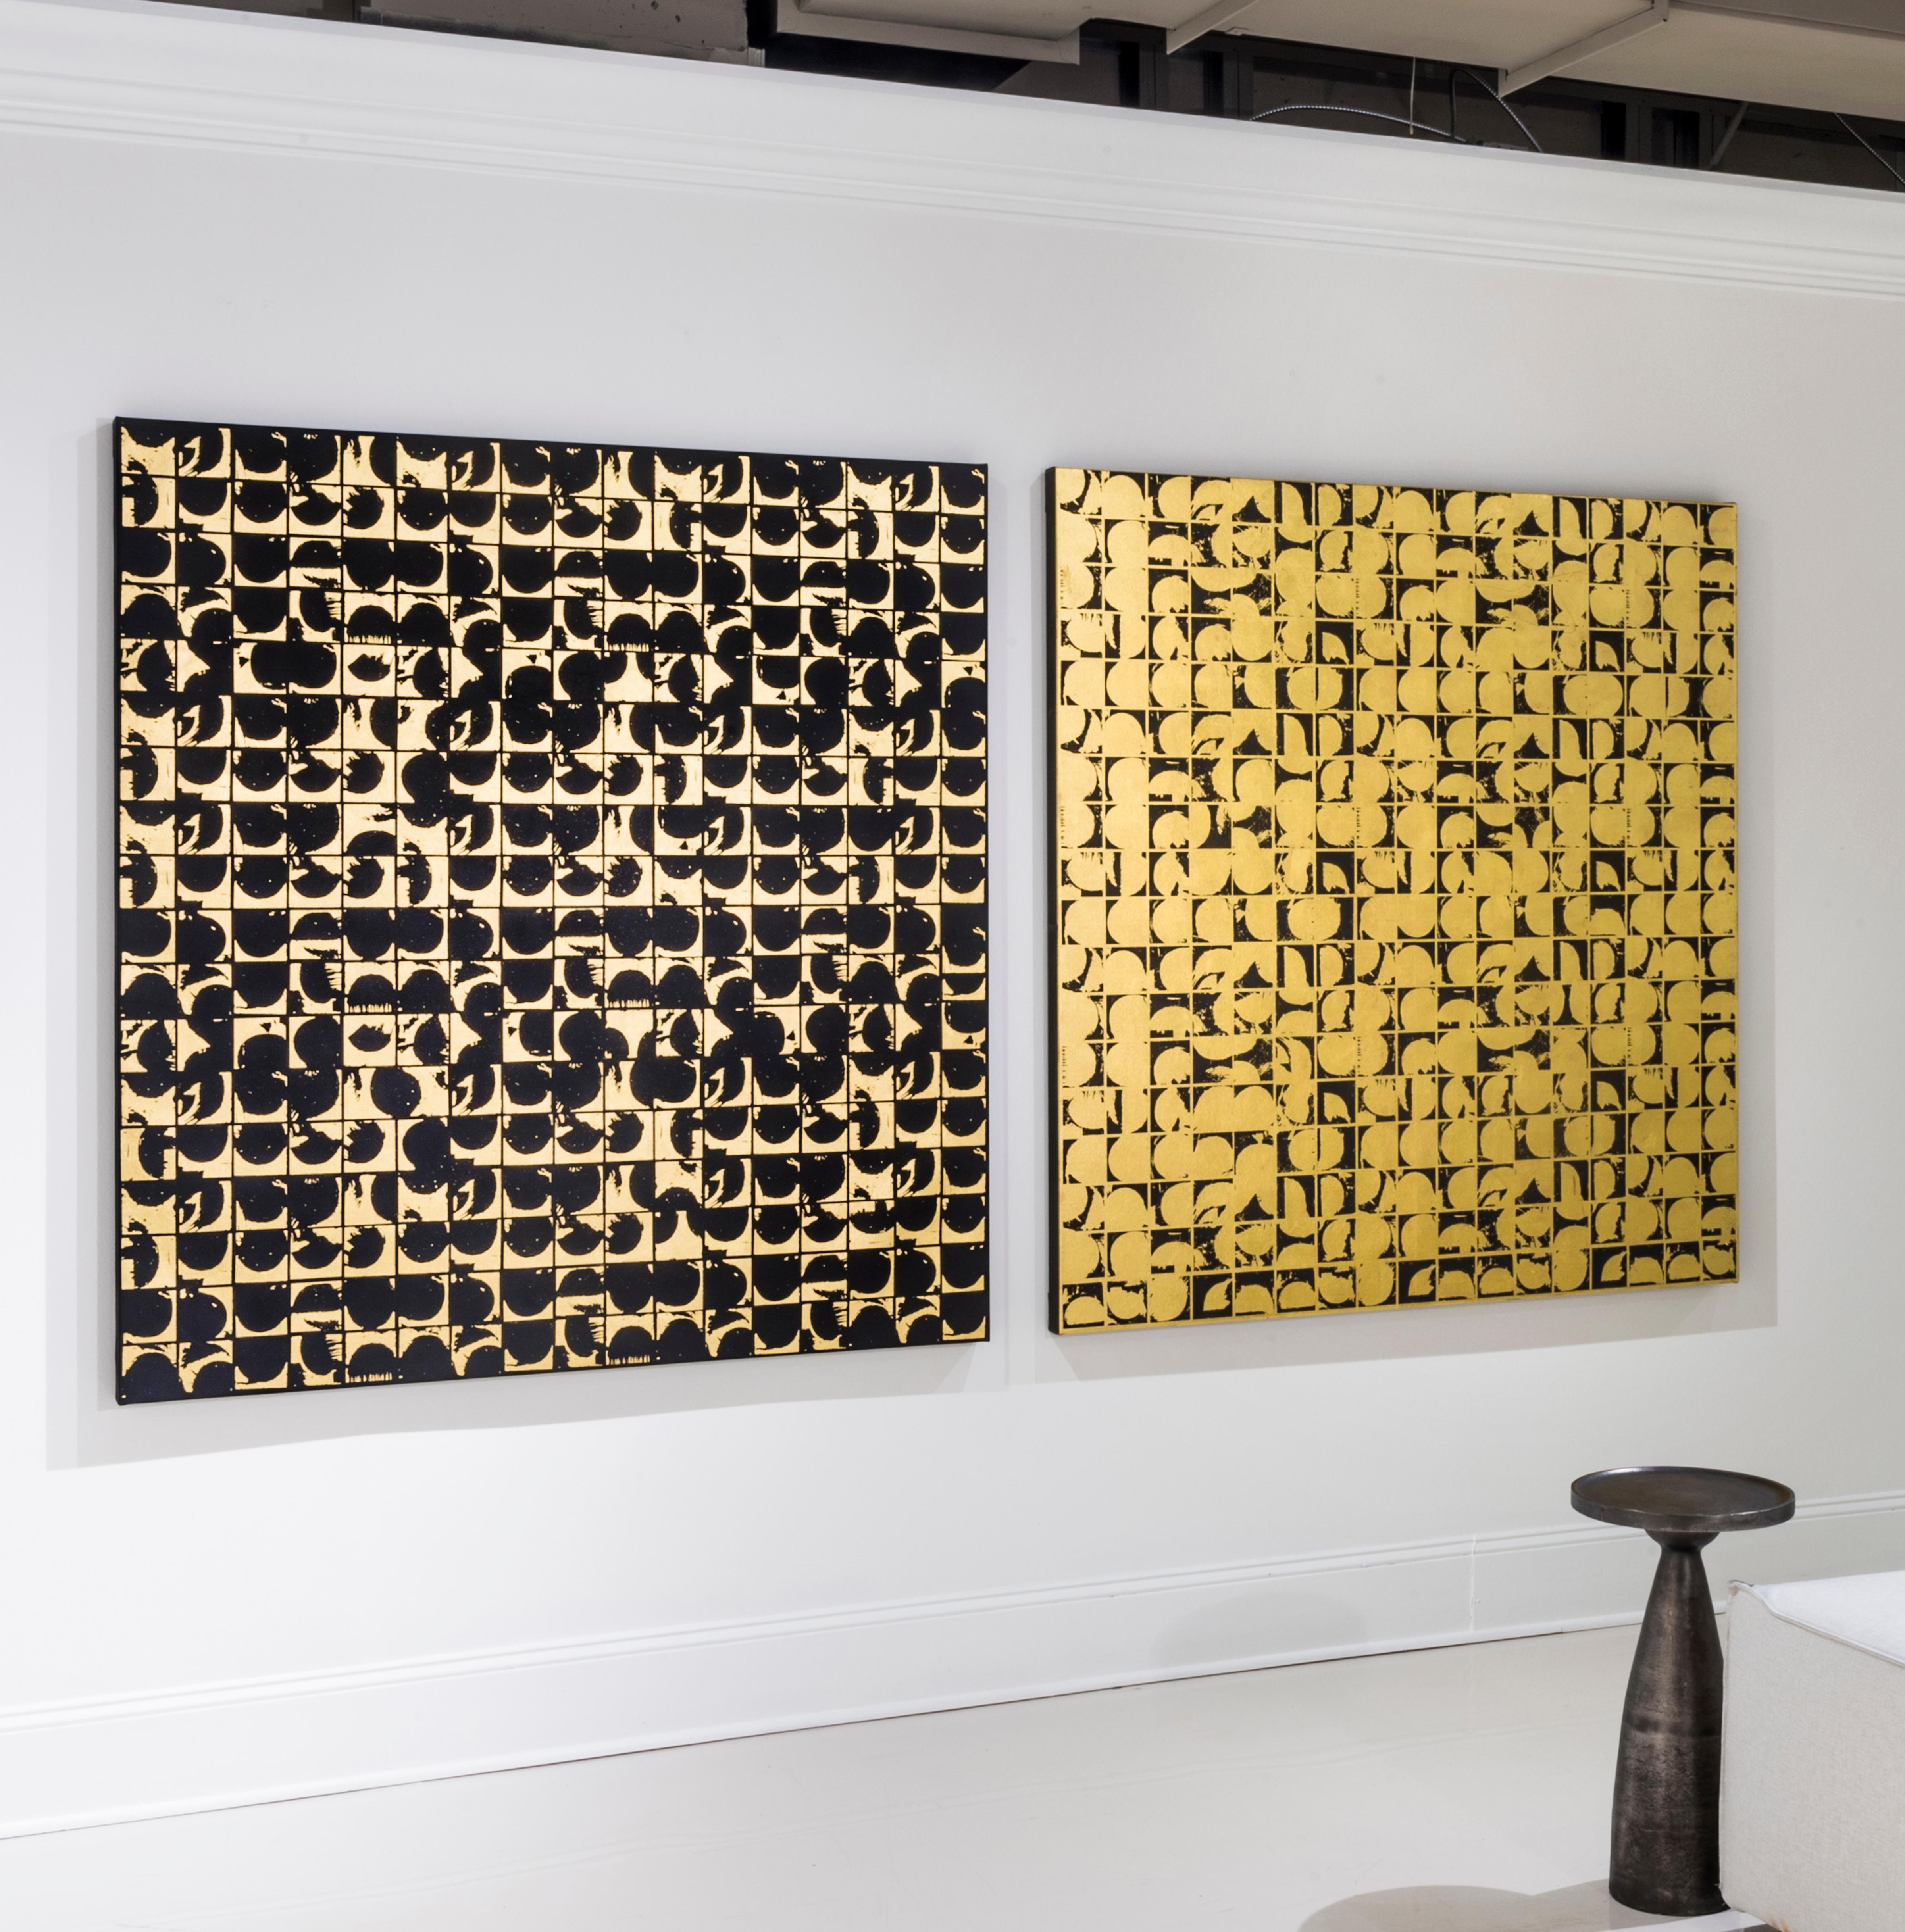 ROUNDS POSITIVE CANVAS I (design gold black metallic work on canvas patterns)  - Gold Abstract Print by Lisa Hunt